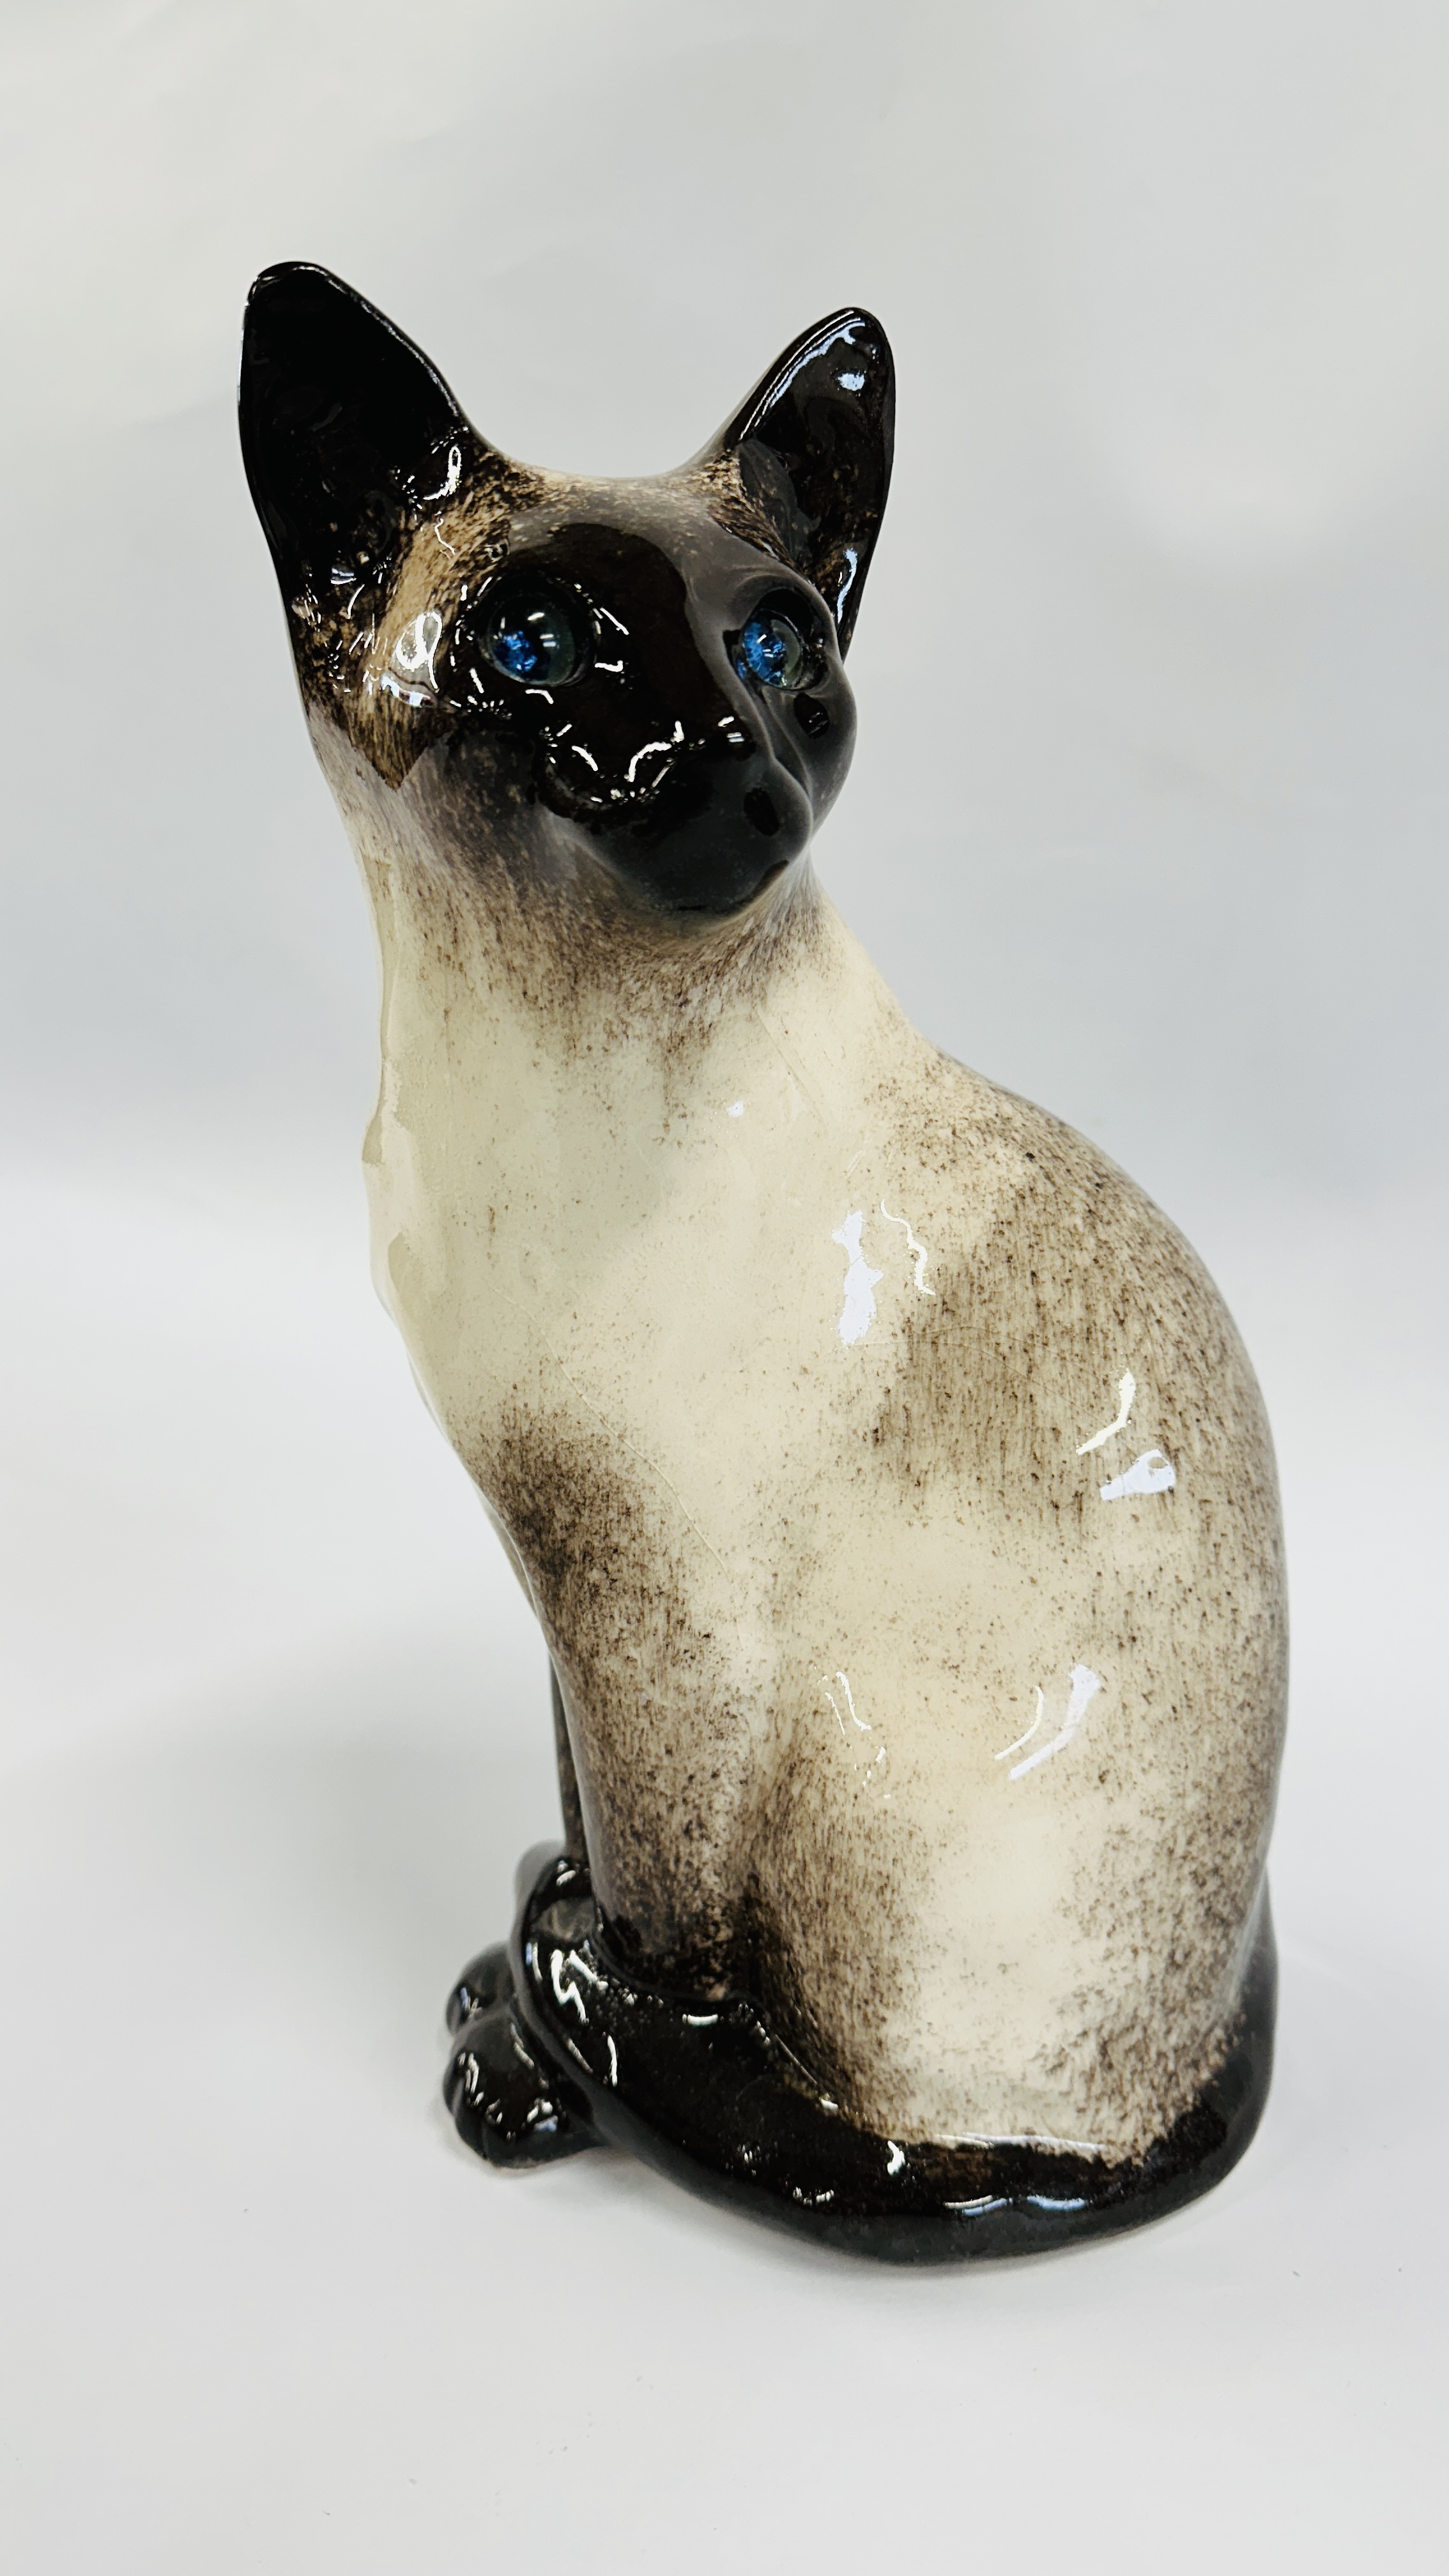 A HANDCRAFTED WINSTANLEY NO. 5 SEATED CAT FIGURE - HEIGHT 32CM.